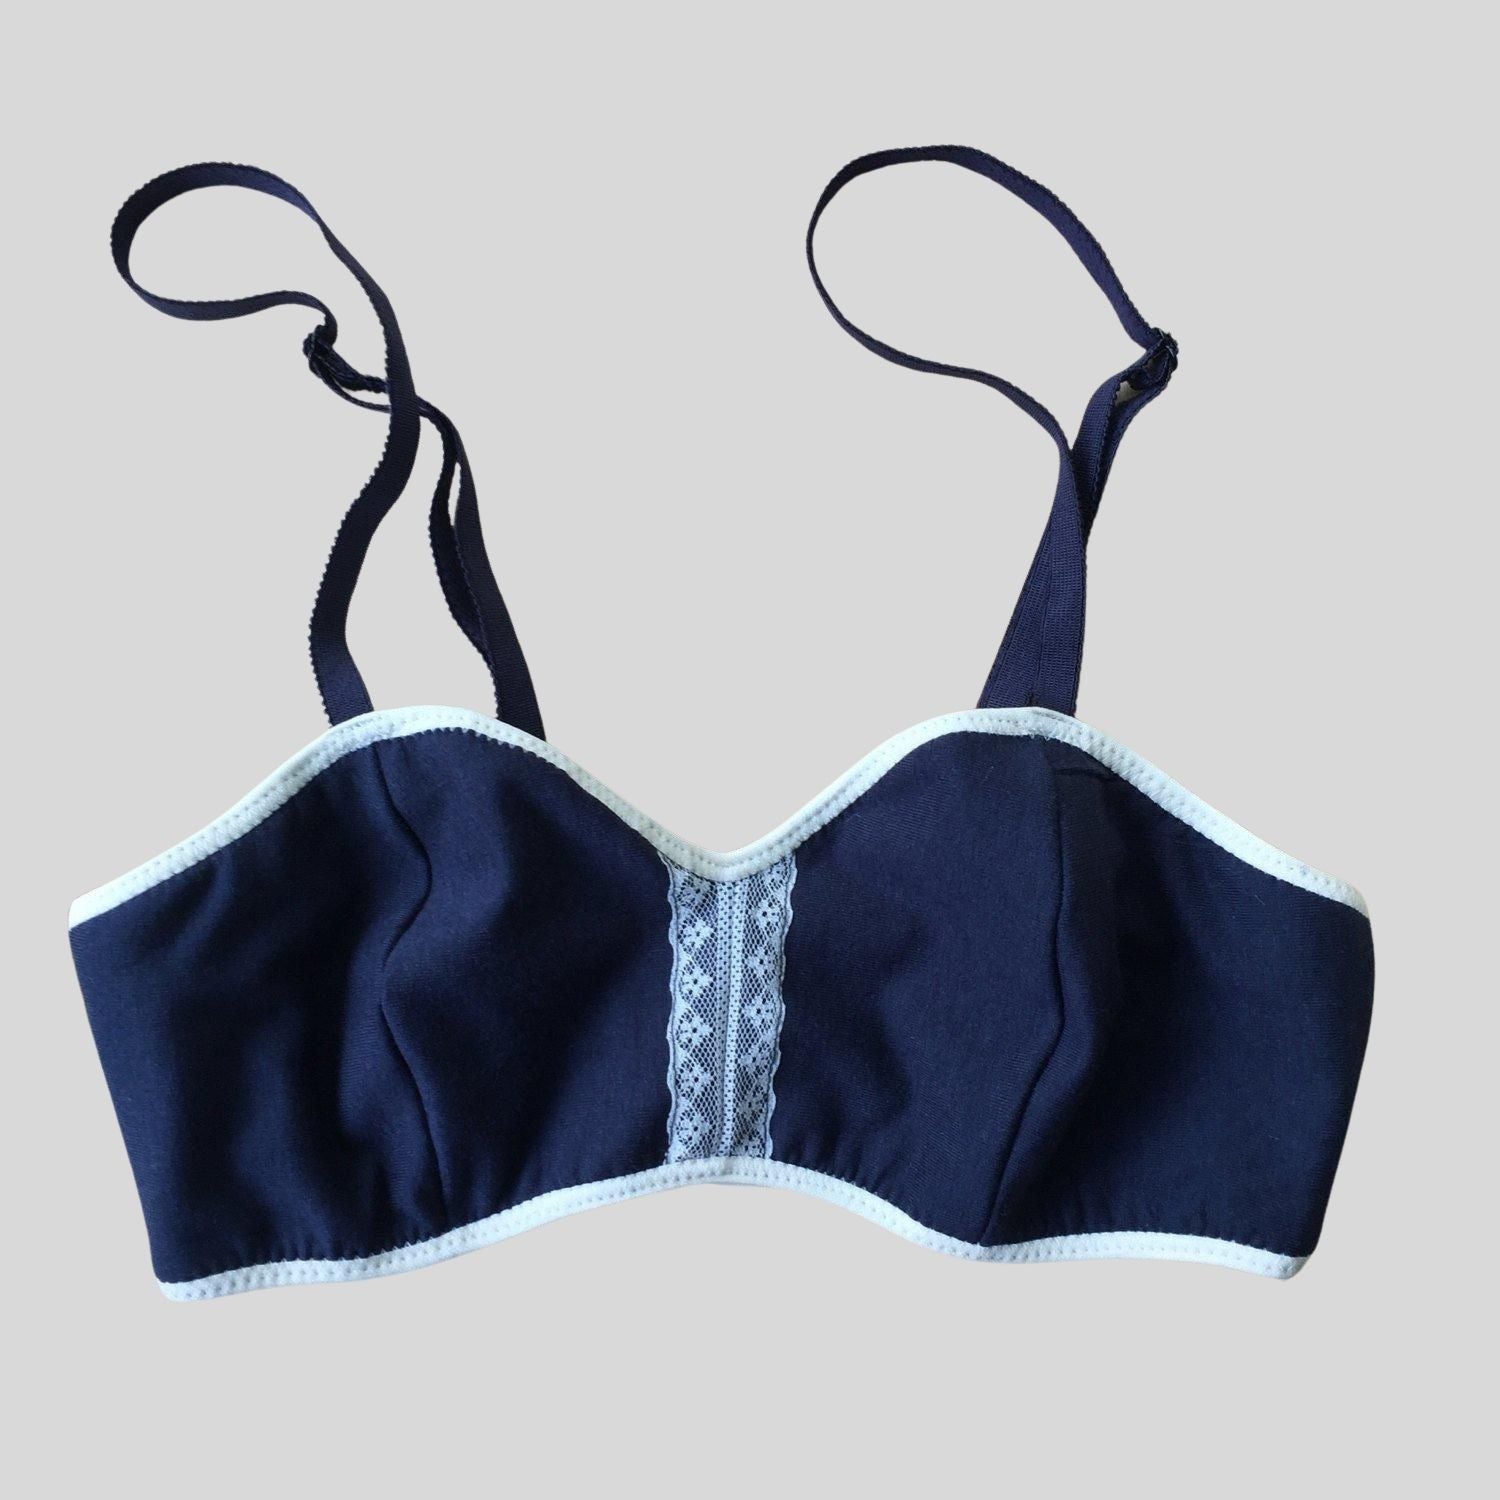 Navy Blue Organic cotton bralette | Made in Canada lingerie | Shop organic cotton bras for women | Made in Canada women’s underwear and bras shop | Buy organic bralettes from Canada